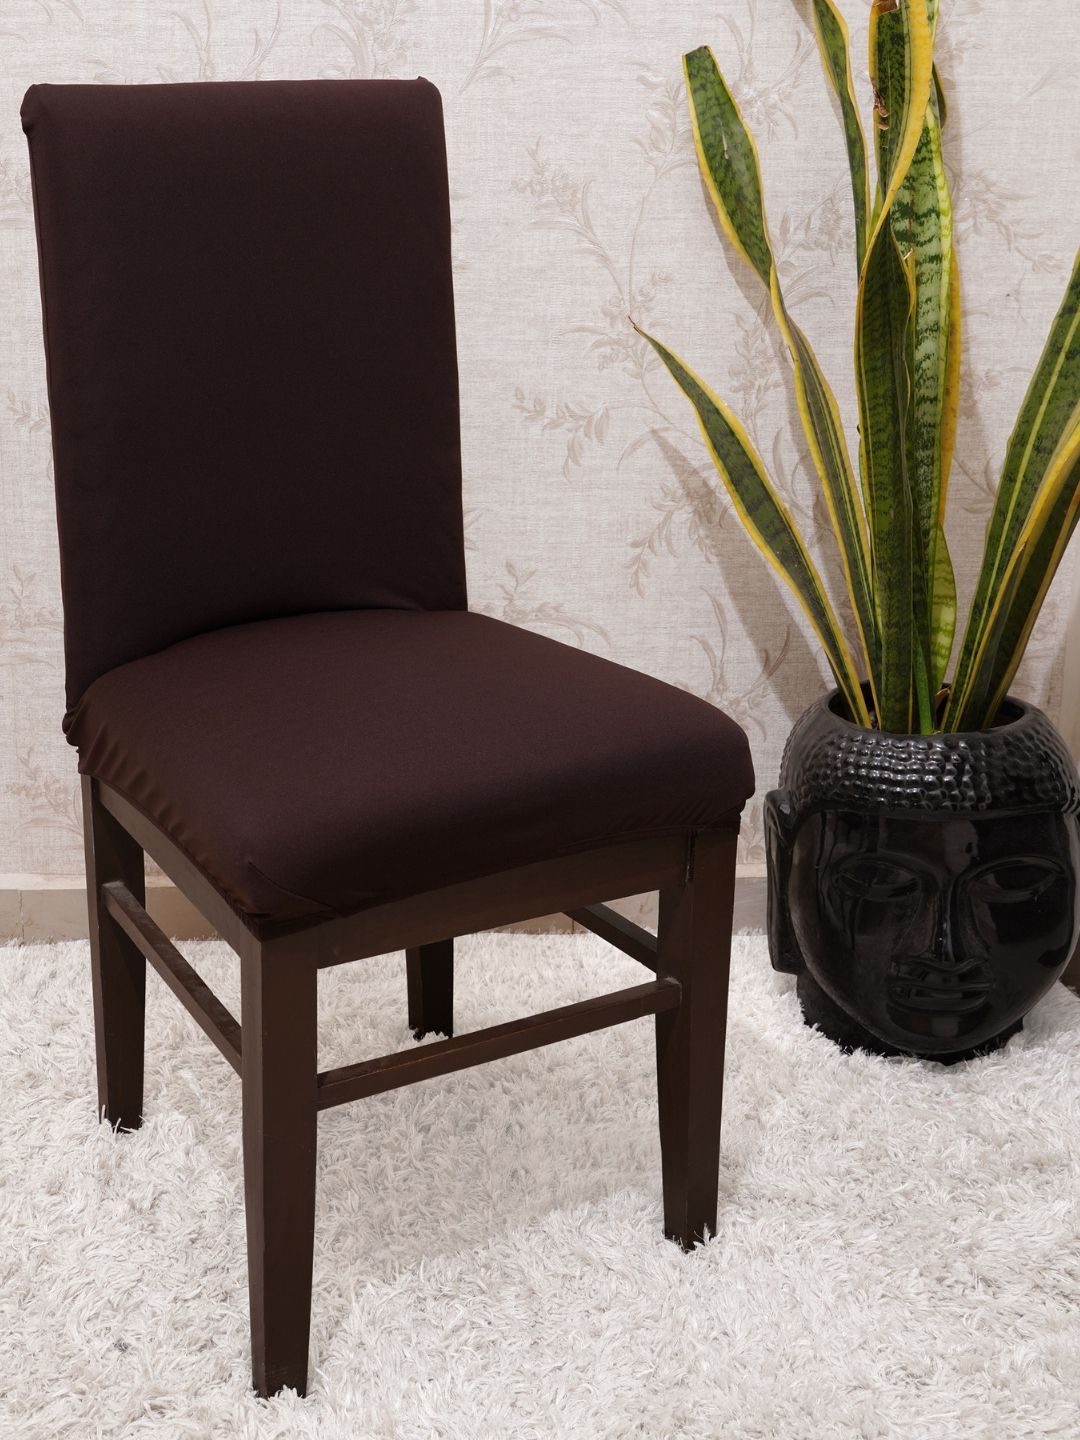 Brown Solid Magic Universal Chair Covers